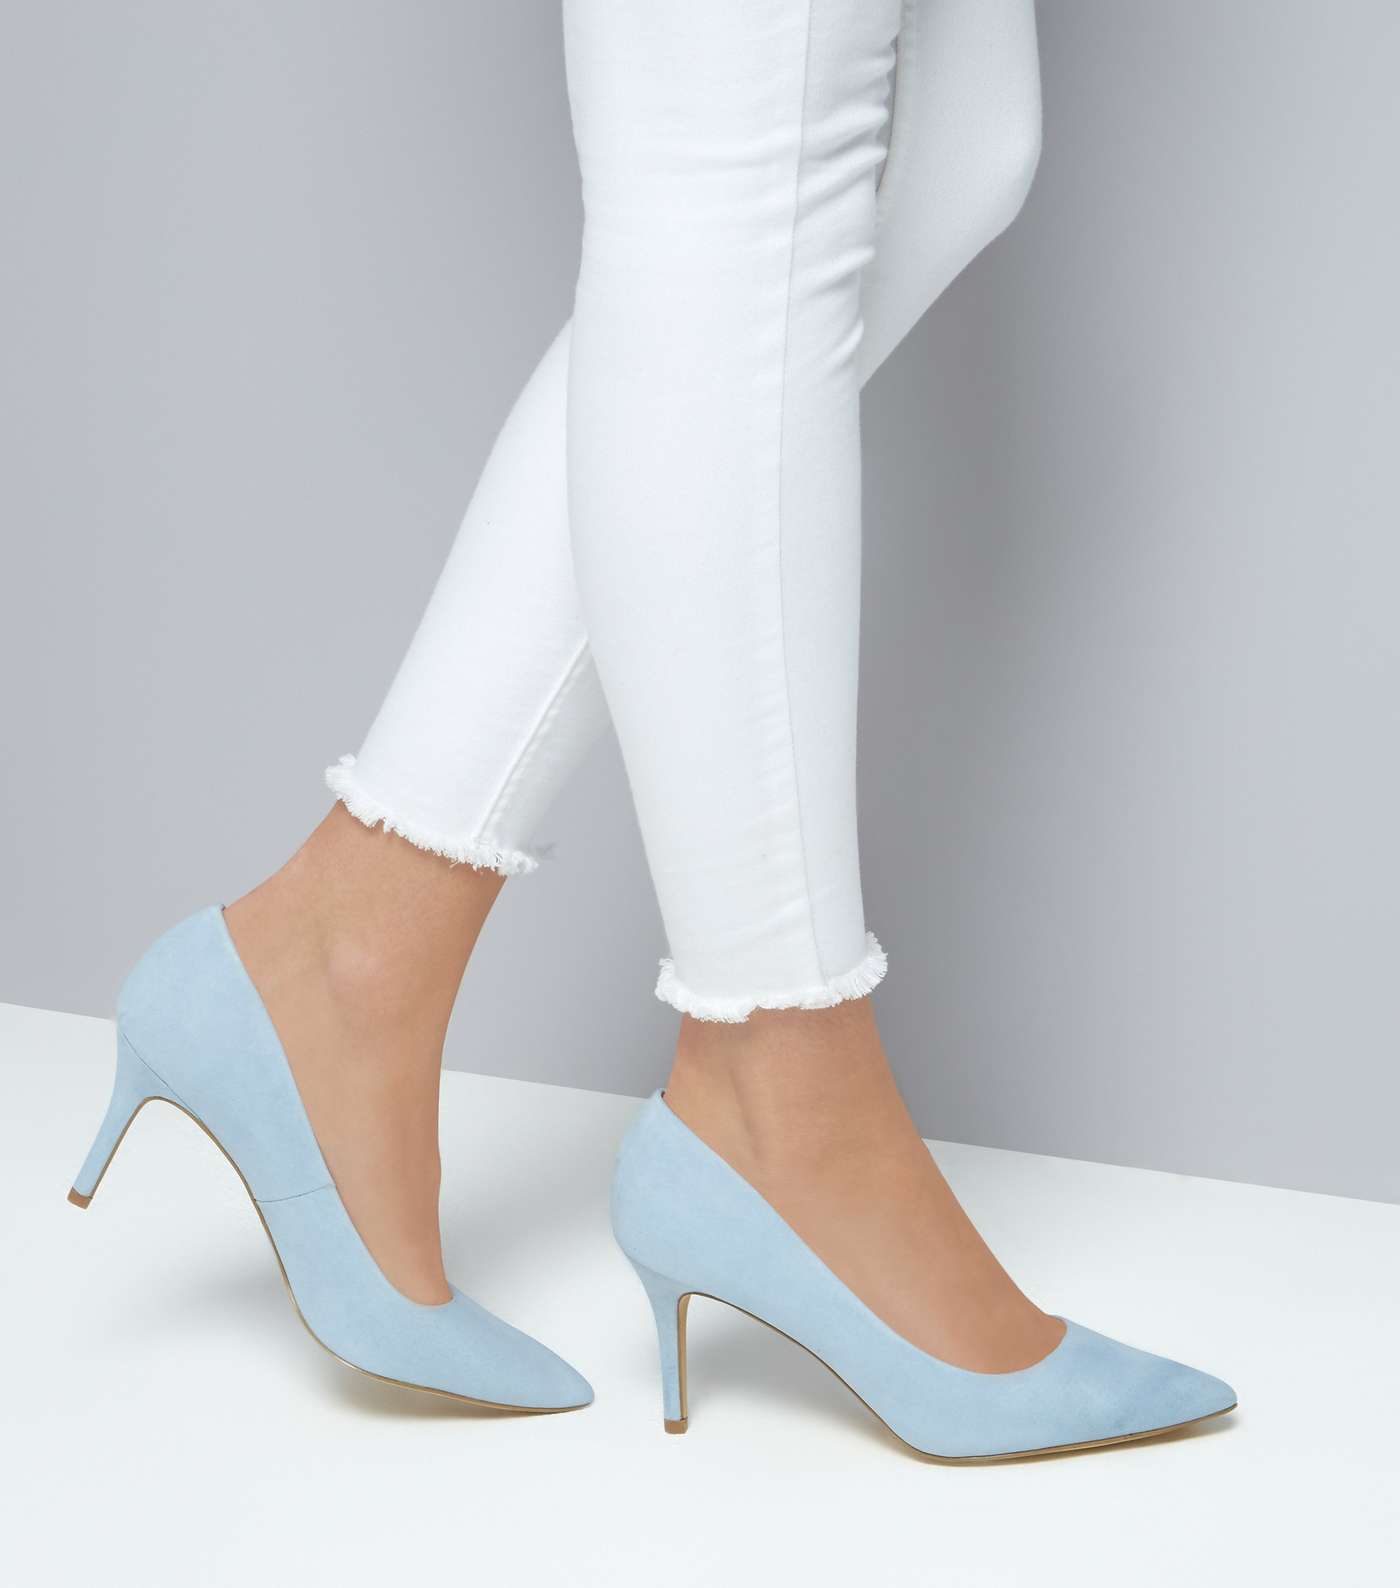 Pale Blue Suedette Mid Heel Pointed Court Shoes Image 3